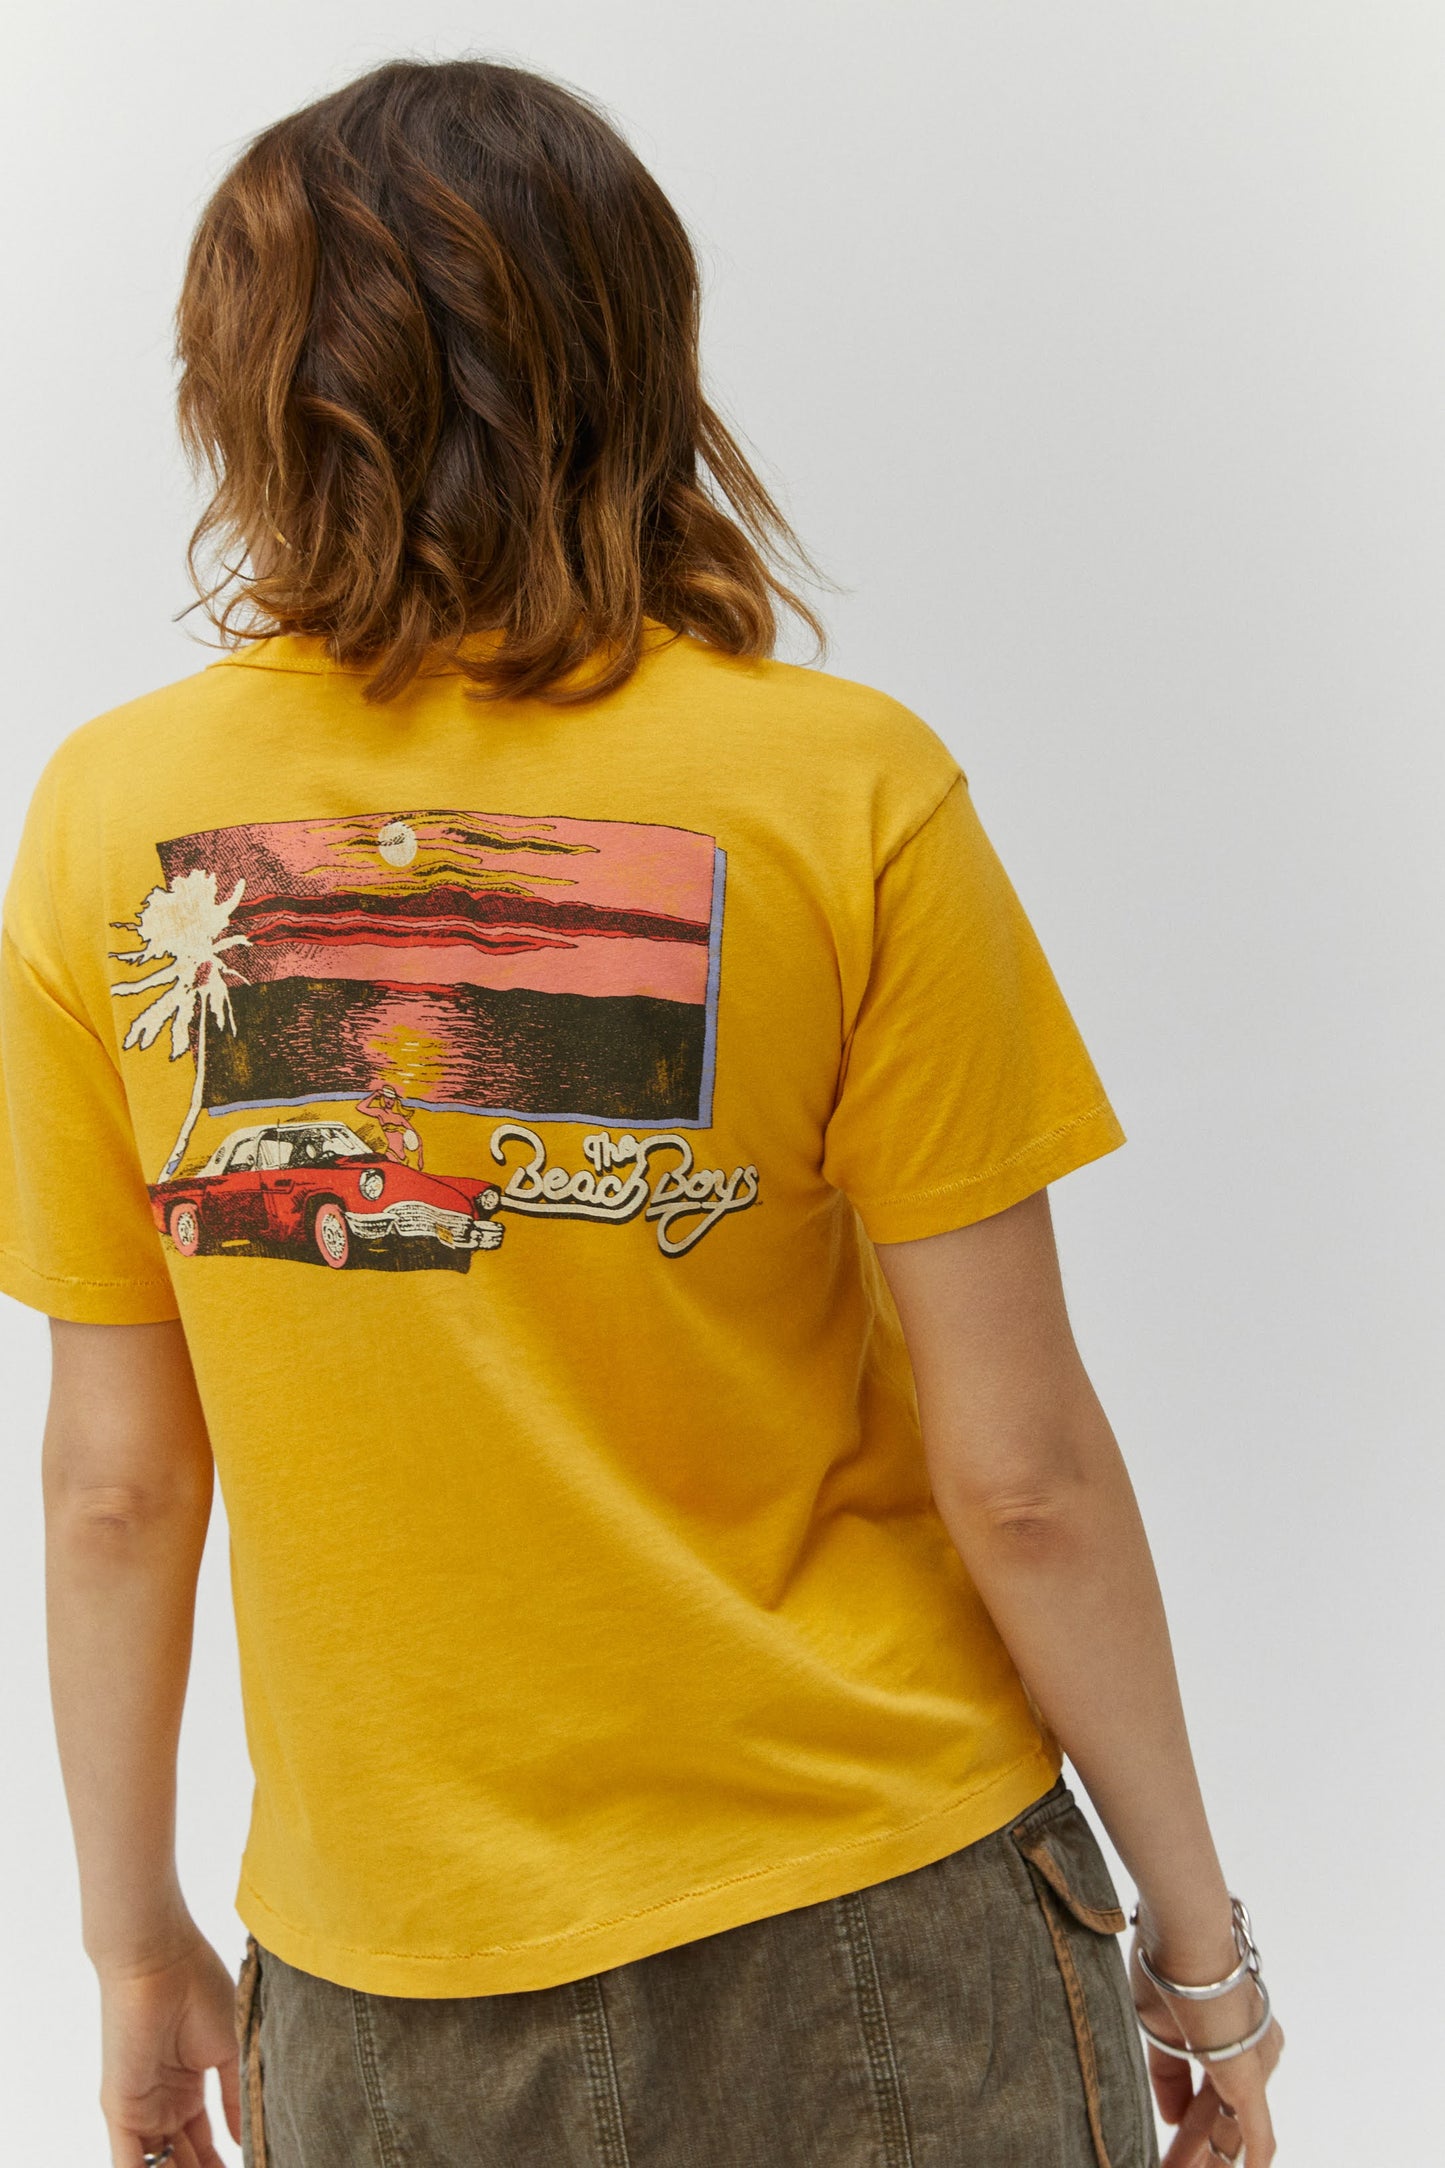 red Cadillac graphic tee